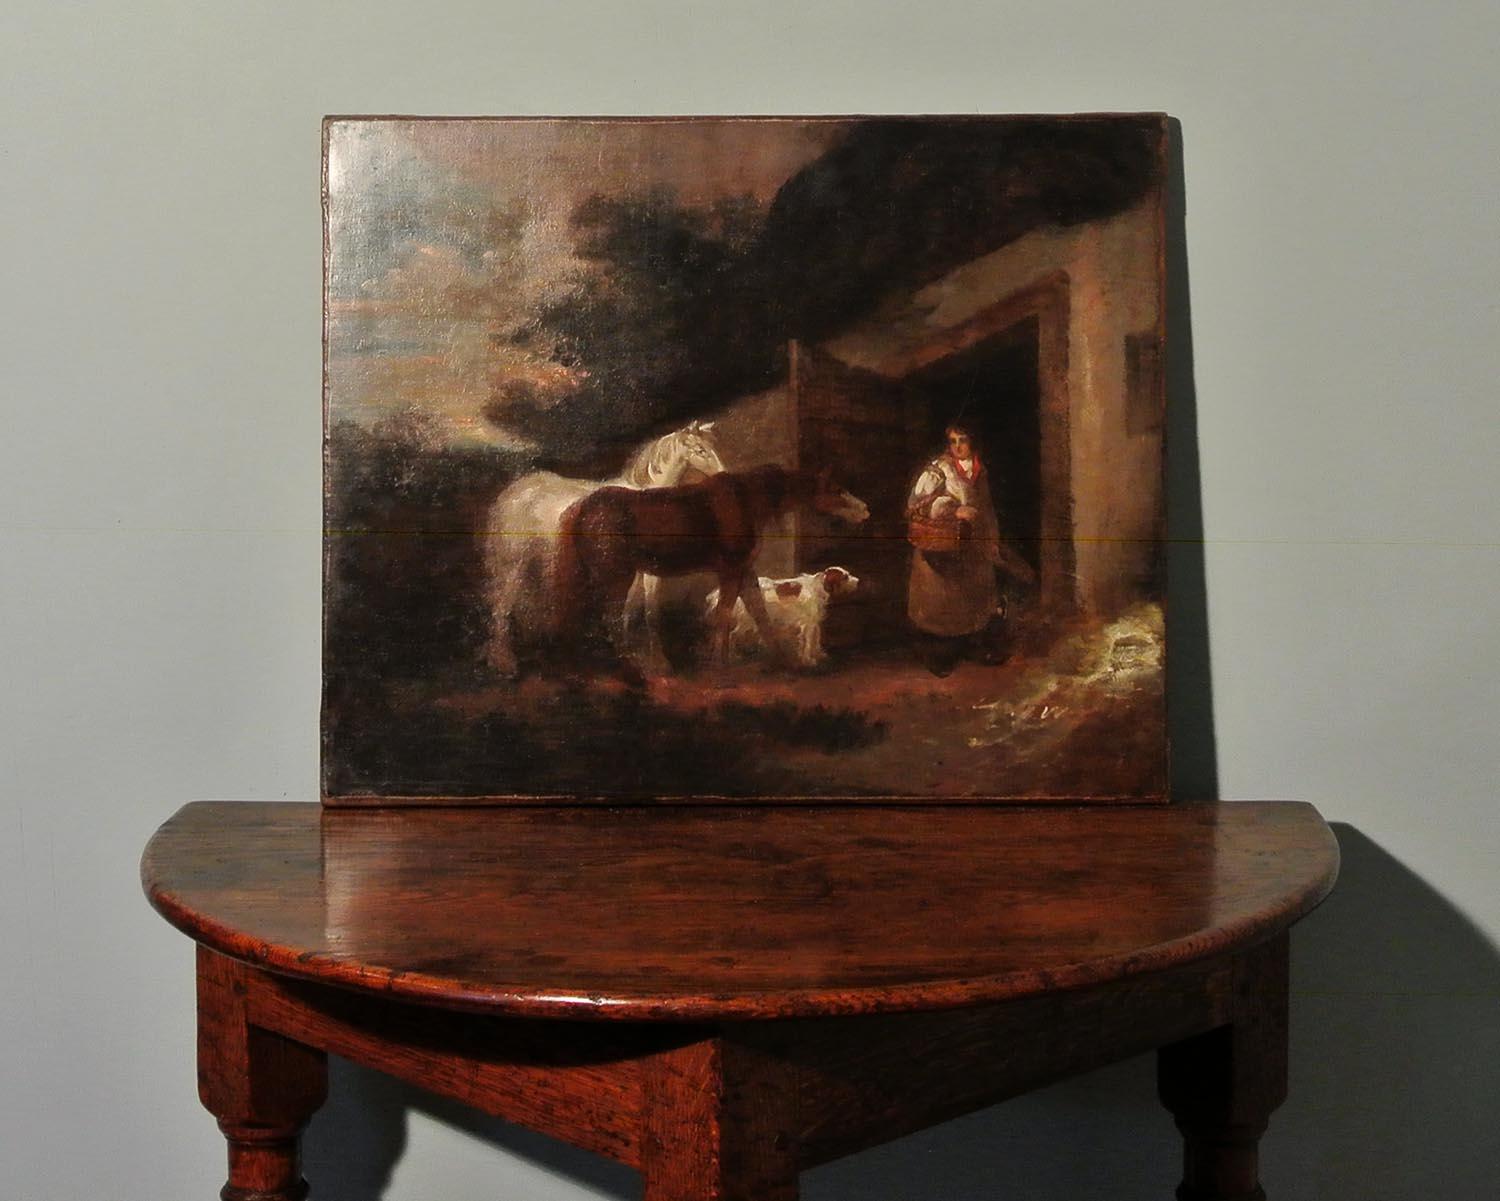 A fine 18th century oil on canvas which appears to depict 'The Bell Inn', frequently painted by George Morland in the late 1700s. The use of light, the color pallet and characteristic themes of dogs, horses and local people are also consistent with